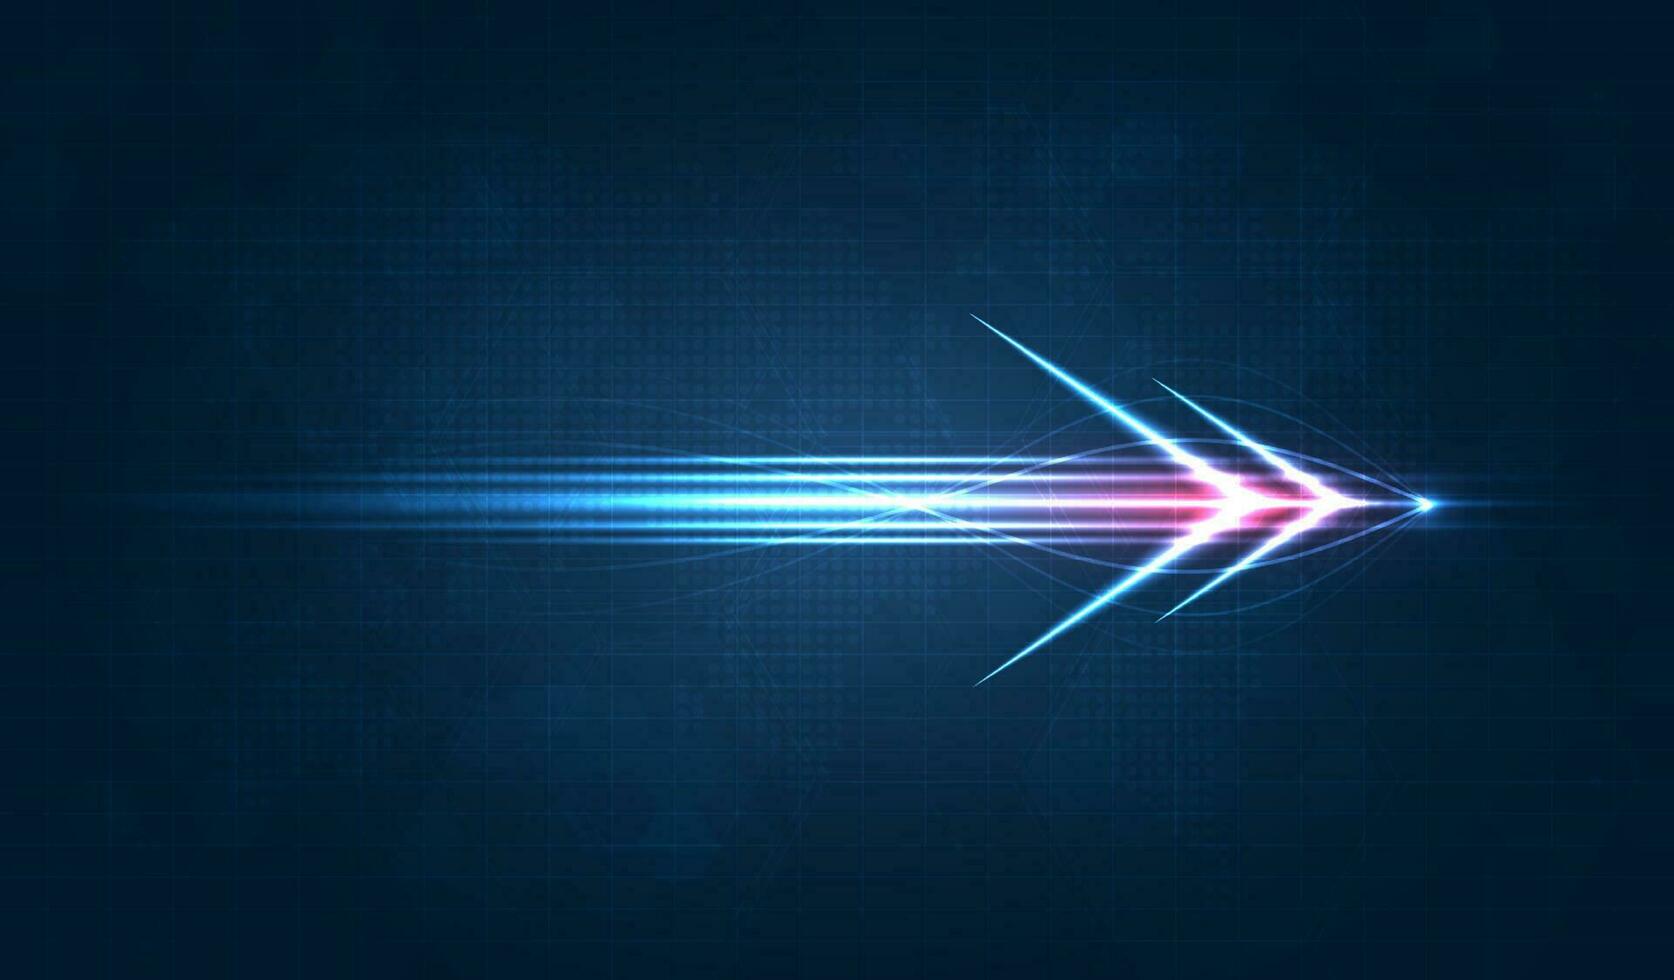 Light speed movement blue arrow technology communicate background. wireless data network and connection technology concept. high-speed, futuristic background. vector design.